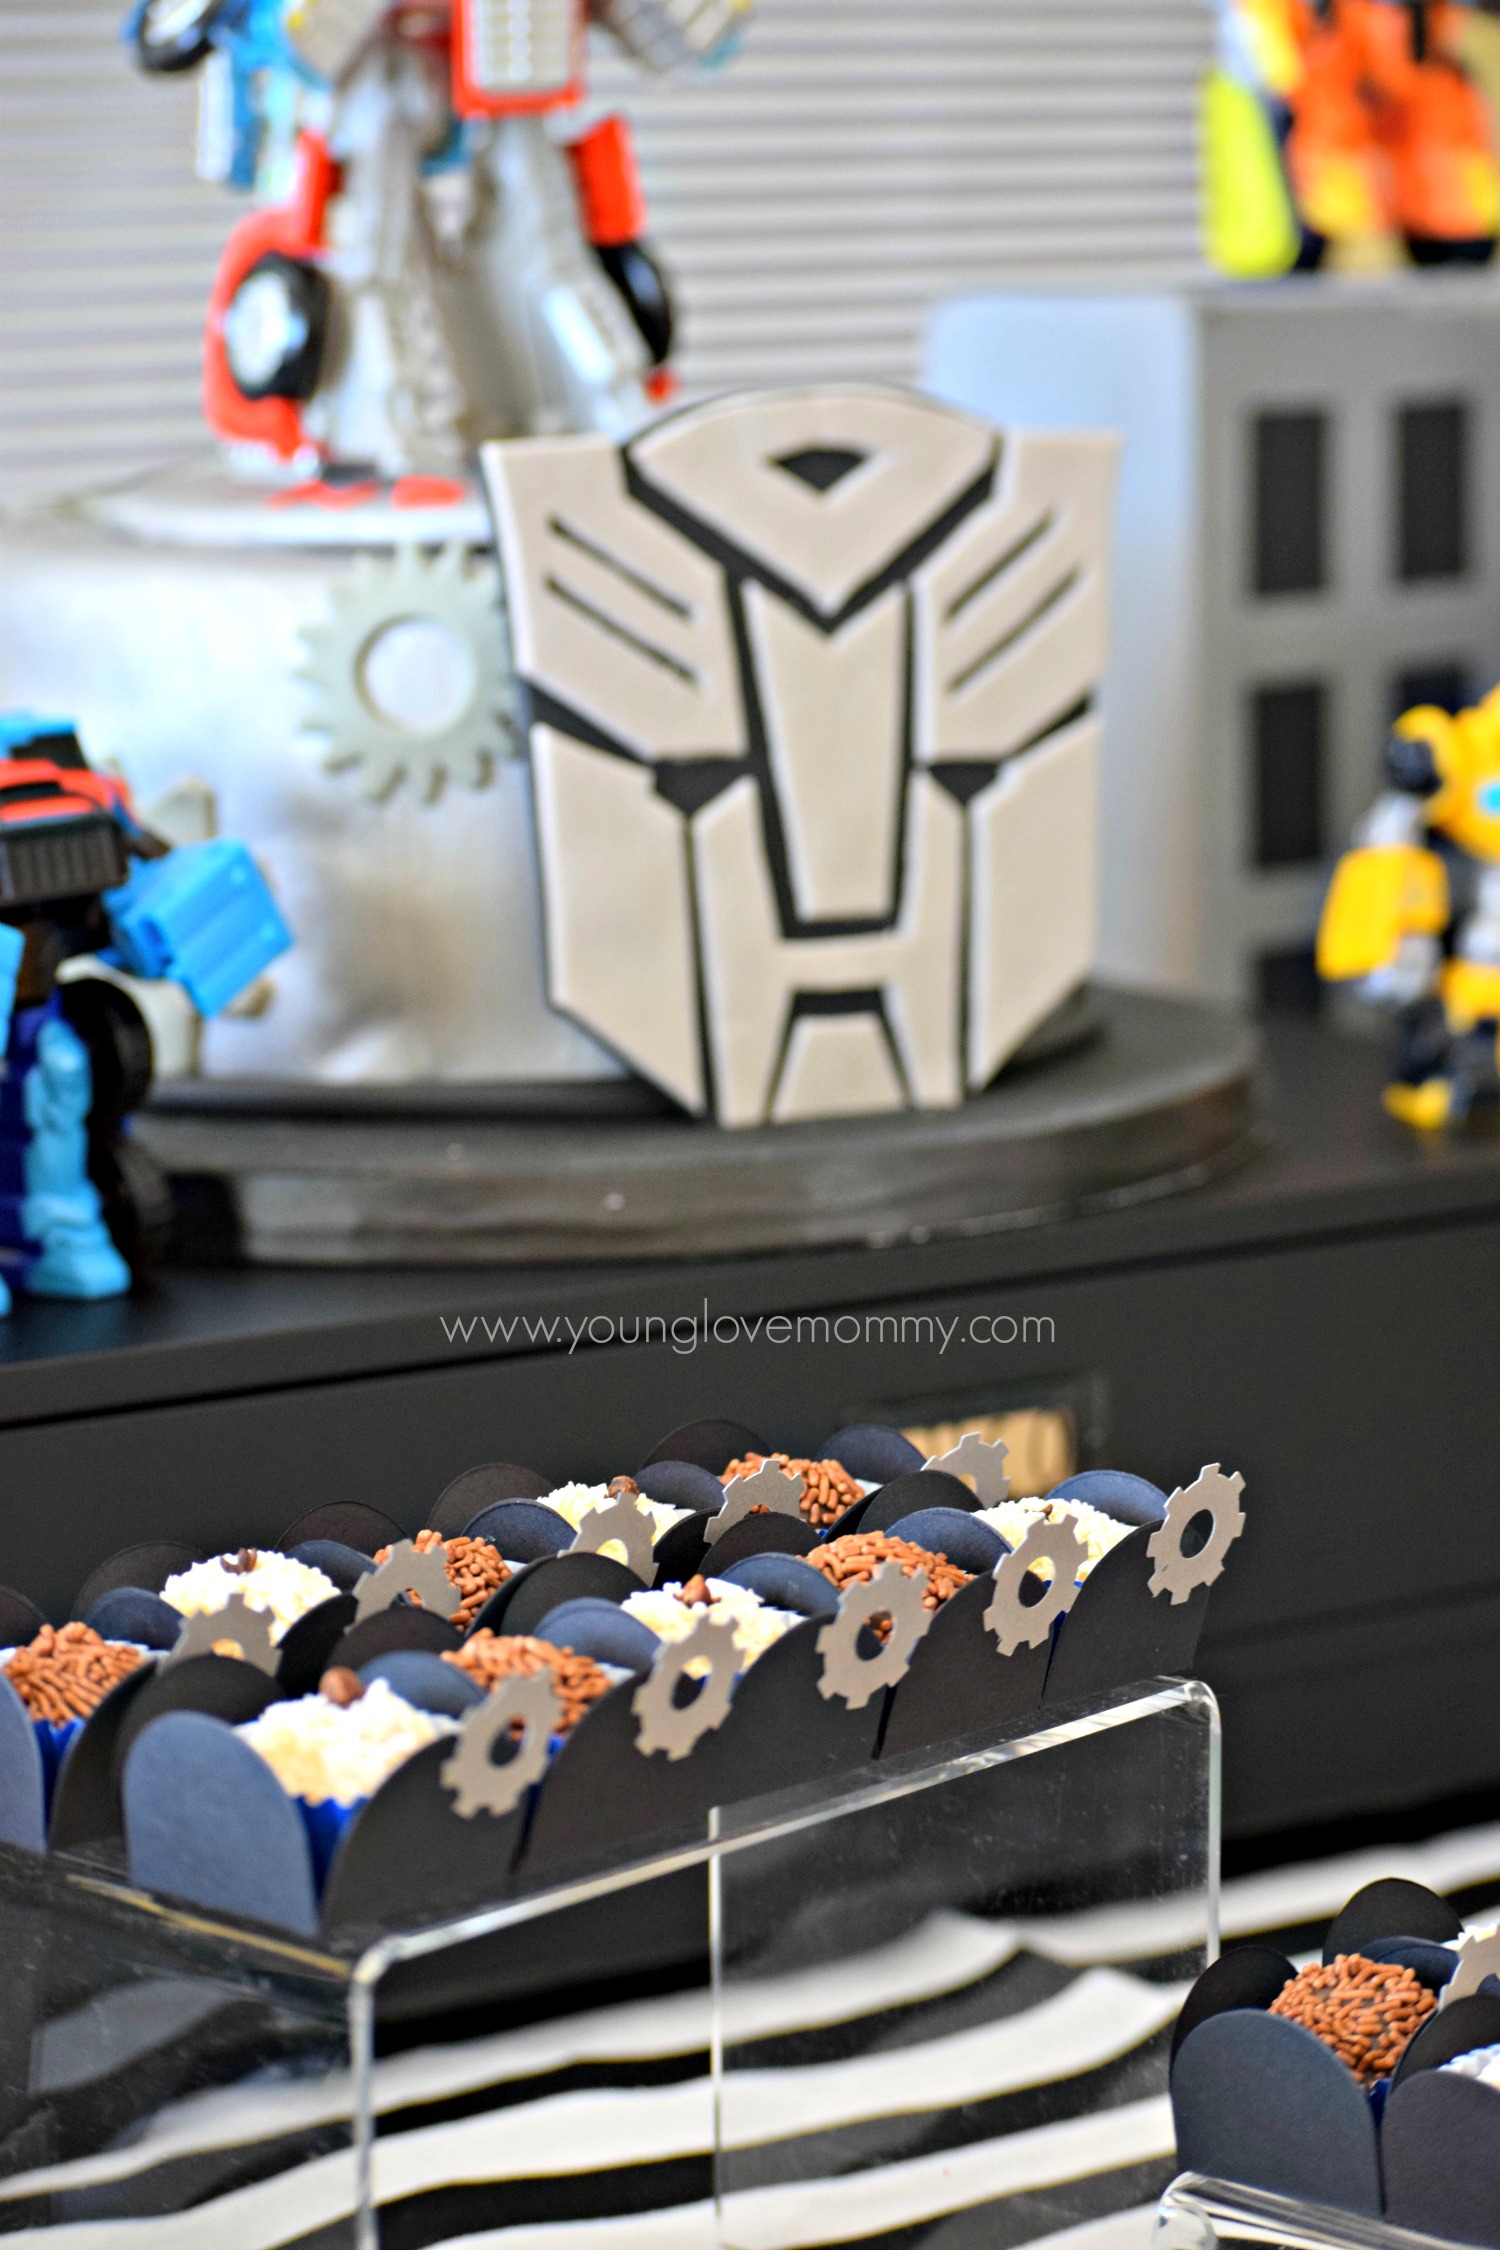 Rescue Bots Transformers Birthday Party Decorations